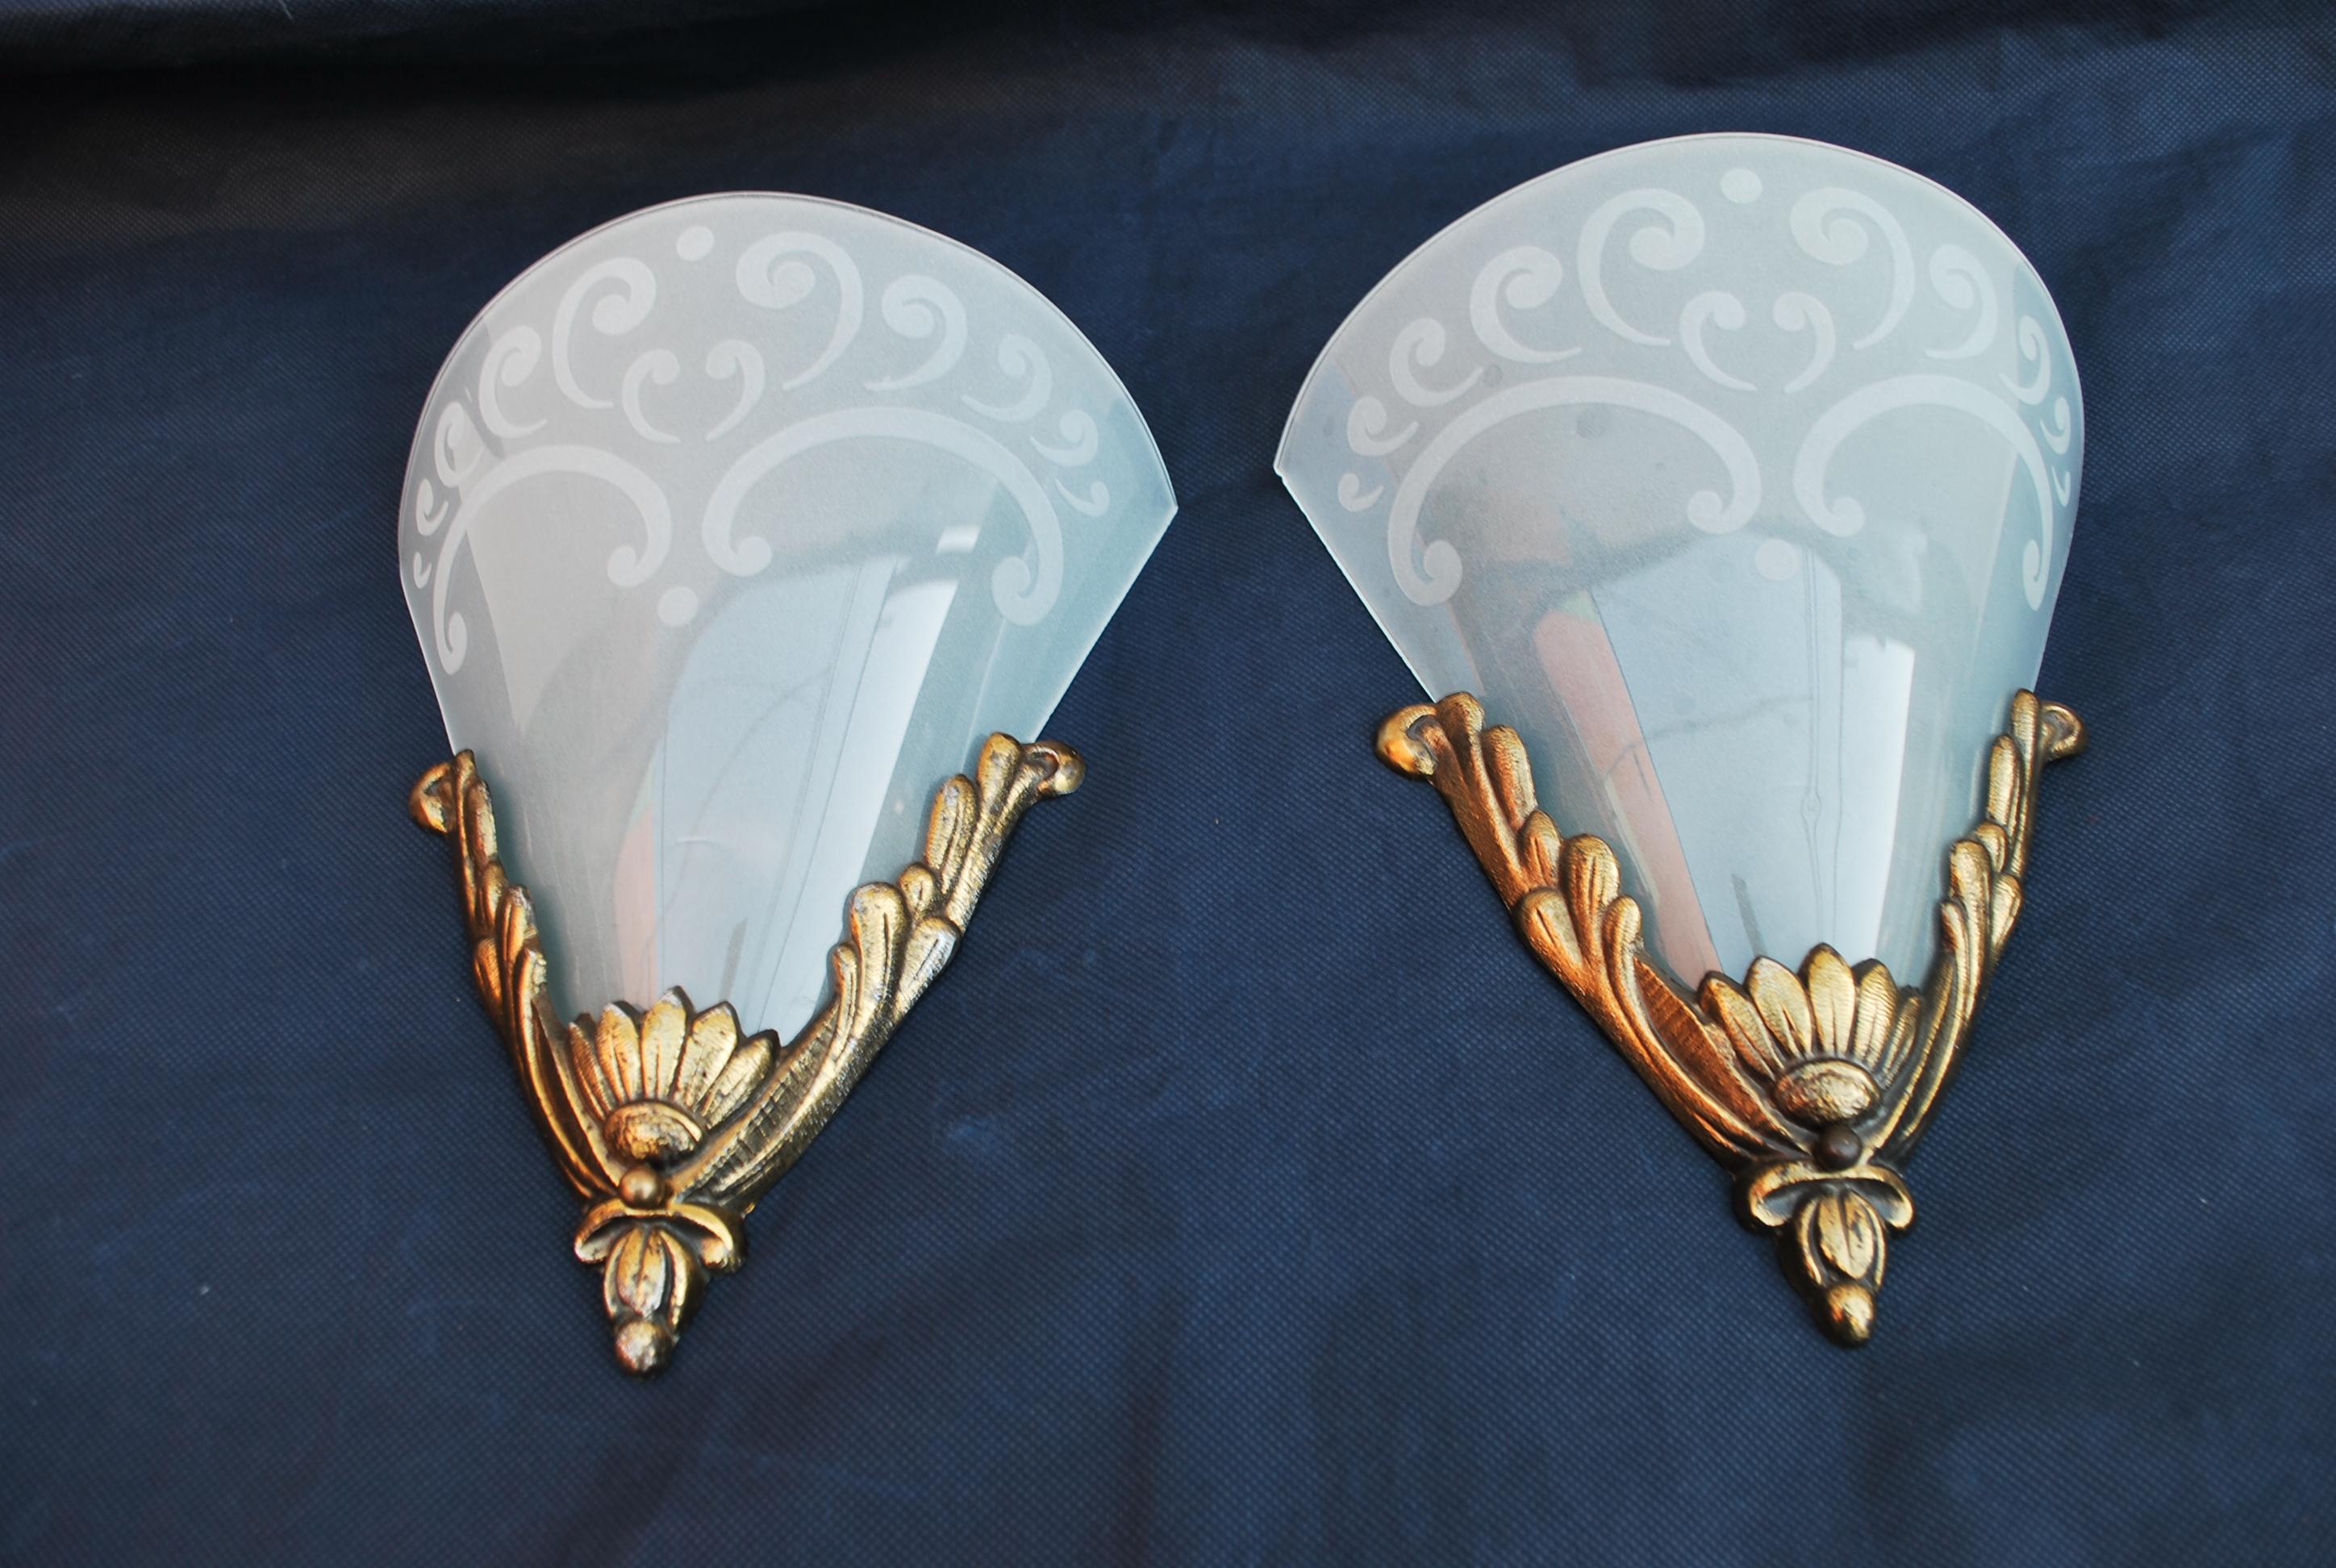 A beautiful pair of French Art Deco sconces, BEWARE THE GLASS IS A LITTLE MORE FROSTED AND WHITE,  it is because they were taken on a dark blue fabric, on a white fabric they look horrible, you could hardly see the glass